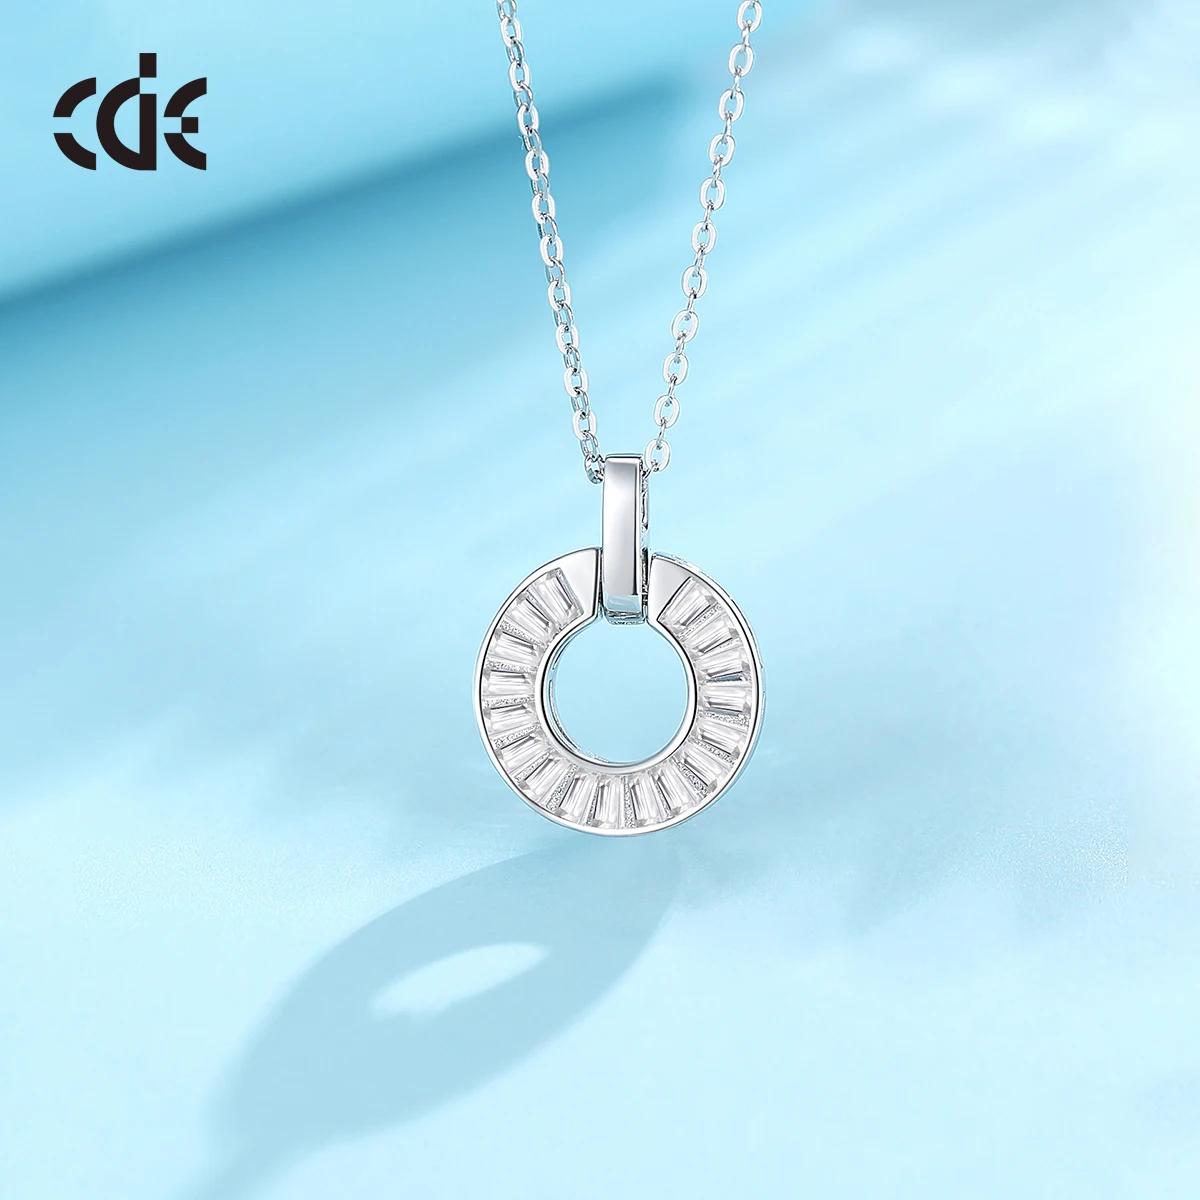 CDE WYN2 Fine 925 Sterling Silver Jewelry Necklace Wholesale Rhodium Plated Chain Pink 5A Cubic Zirconia Pendant Necklace